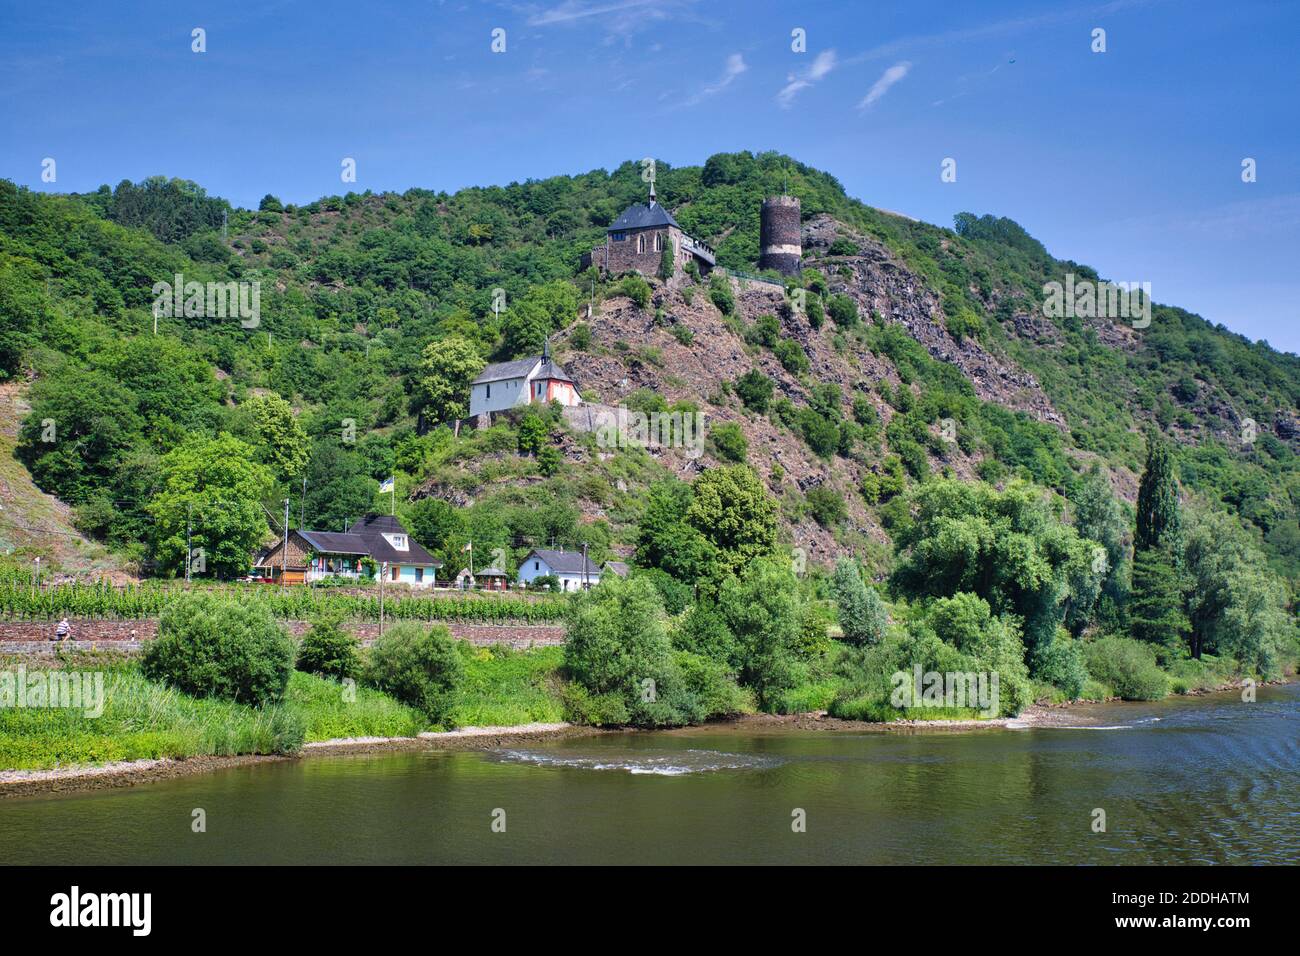 A pretty landscape viewed from the River Rhine in Germany with buildings on a hillside and a castle tower overlooking from the top. Stock Photo